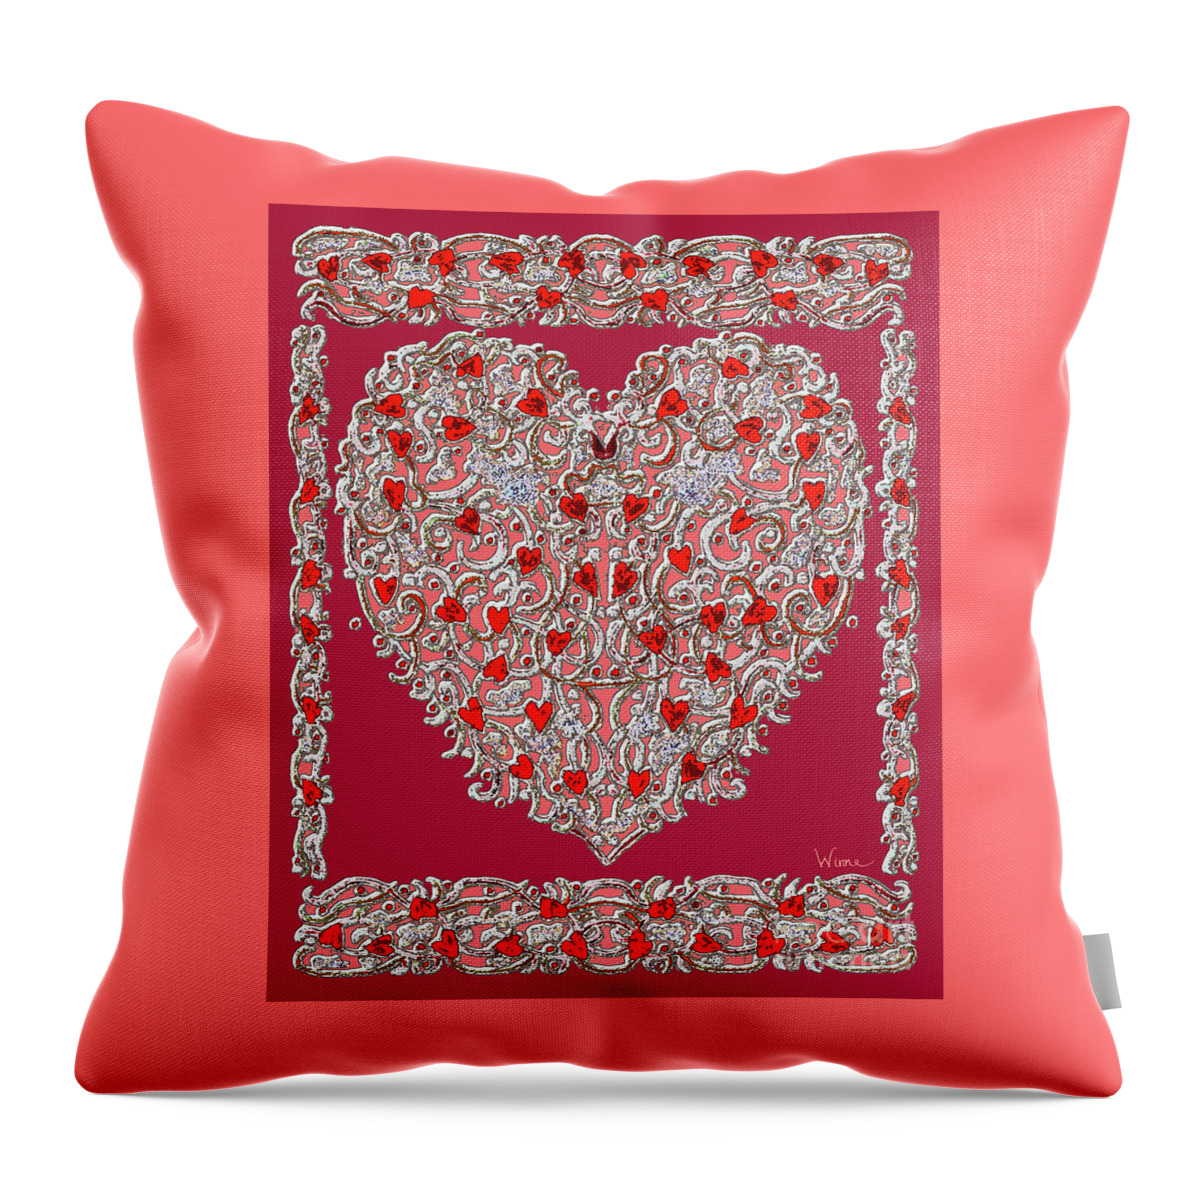 Lise Winne Throw Pillow featuring the digital art Renaissance Style Heart with Dark Red Background by Lise Winne